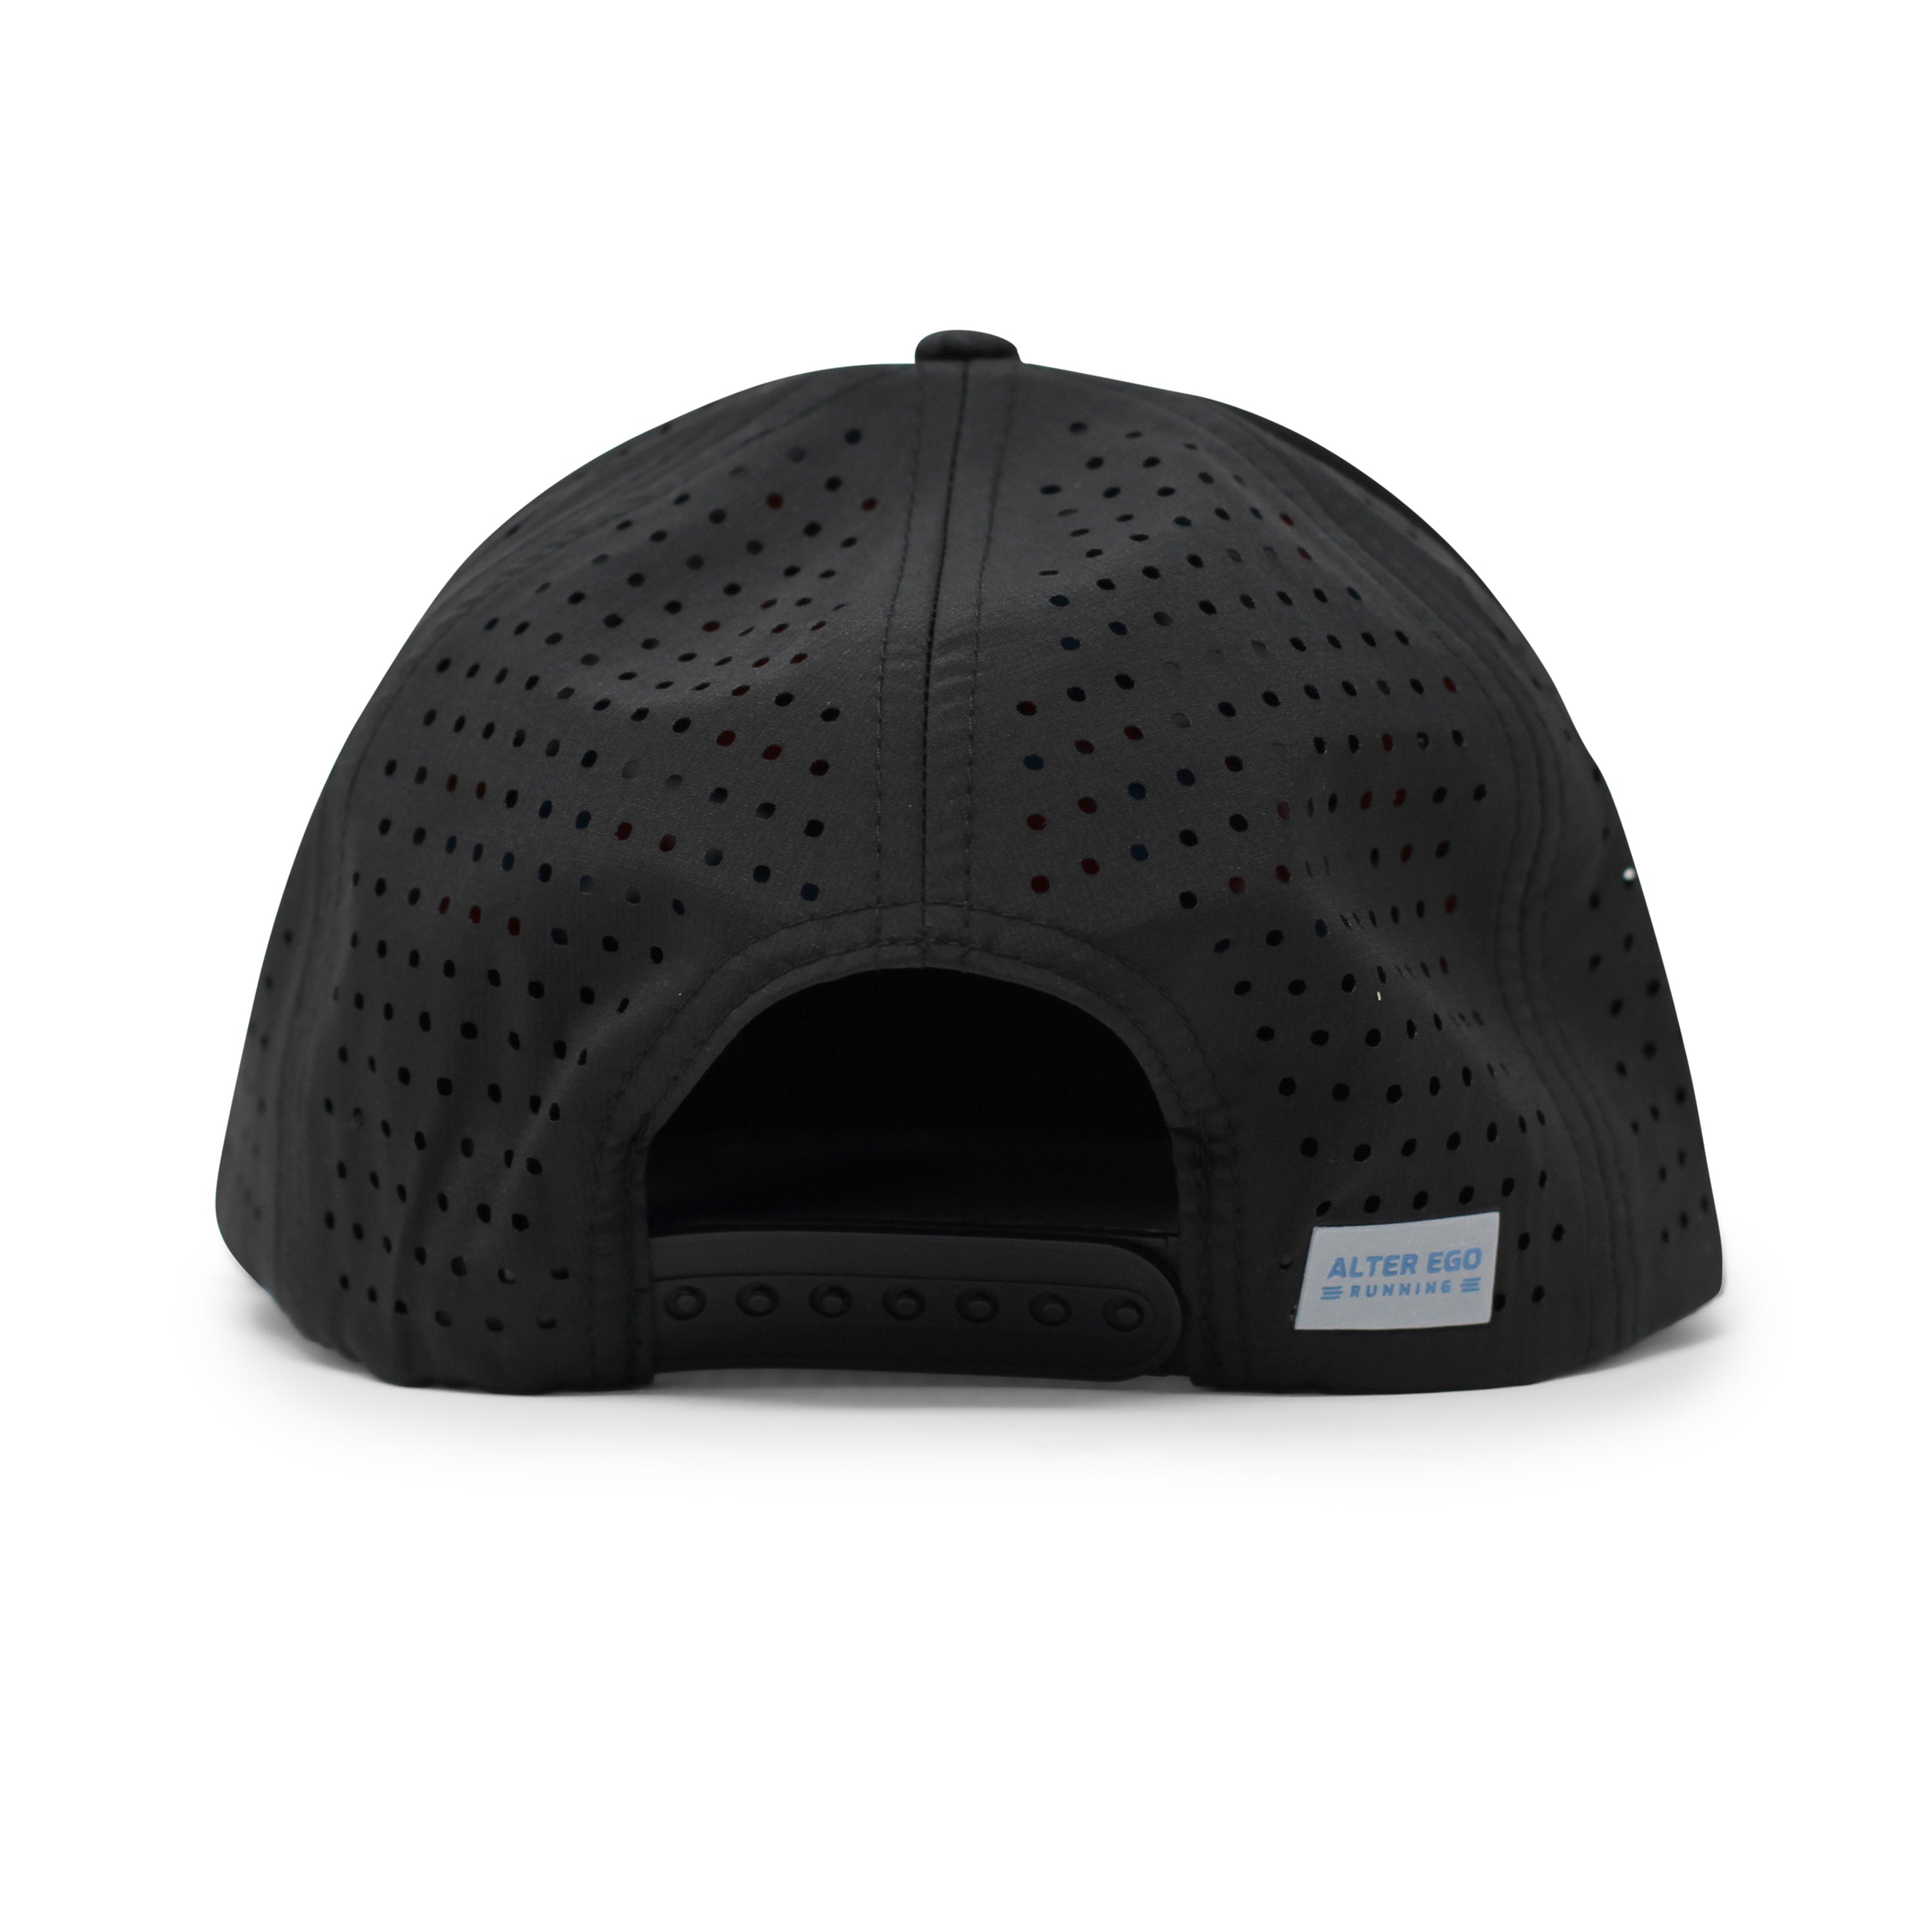 ALL HATS – Tagged men's– Page 4 – Alter Ego Running